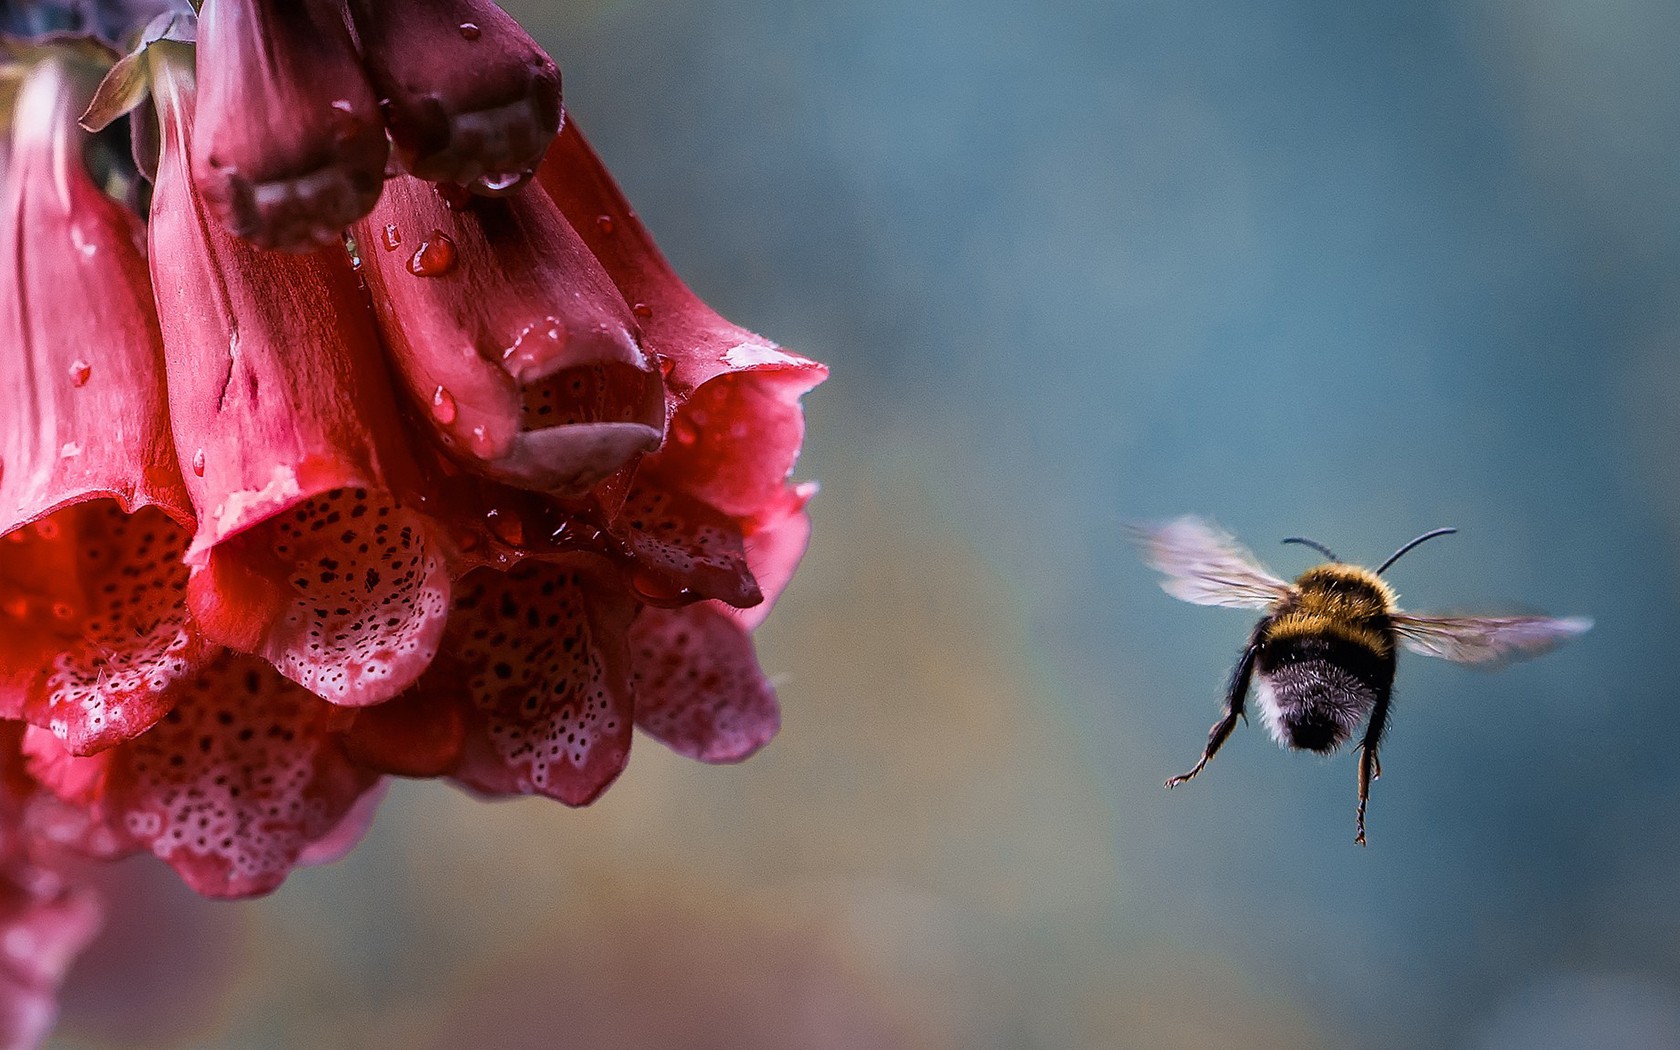 General 1680x1050 flowers bumblebees bees dew insect water drops nature animals red flowers plants